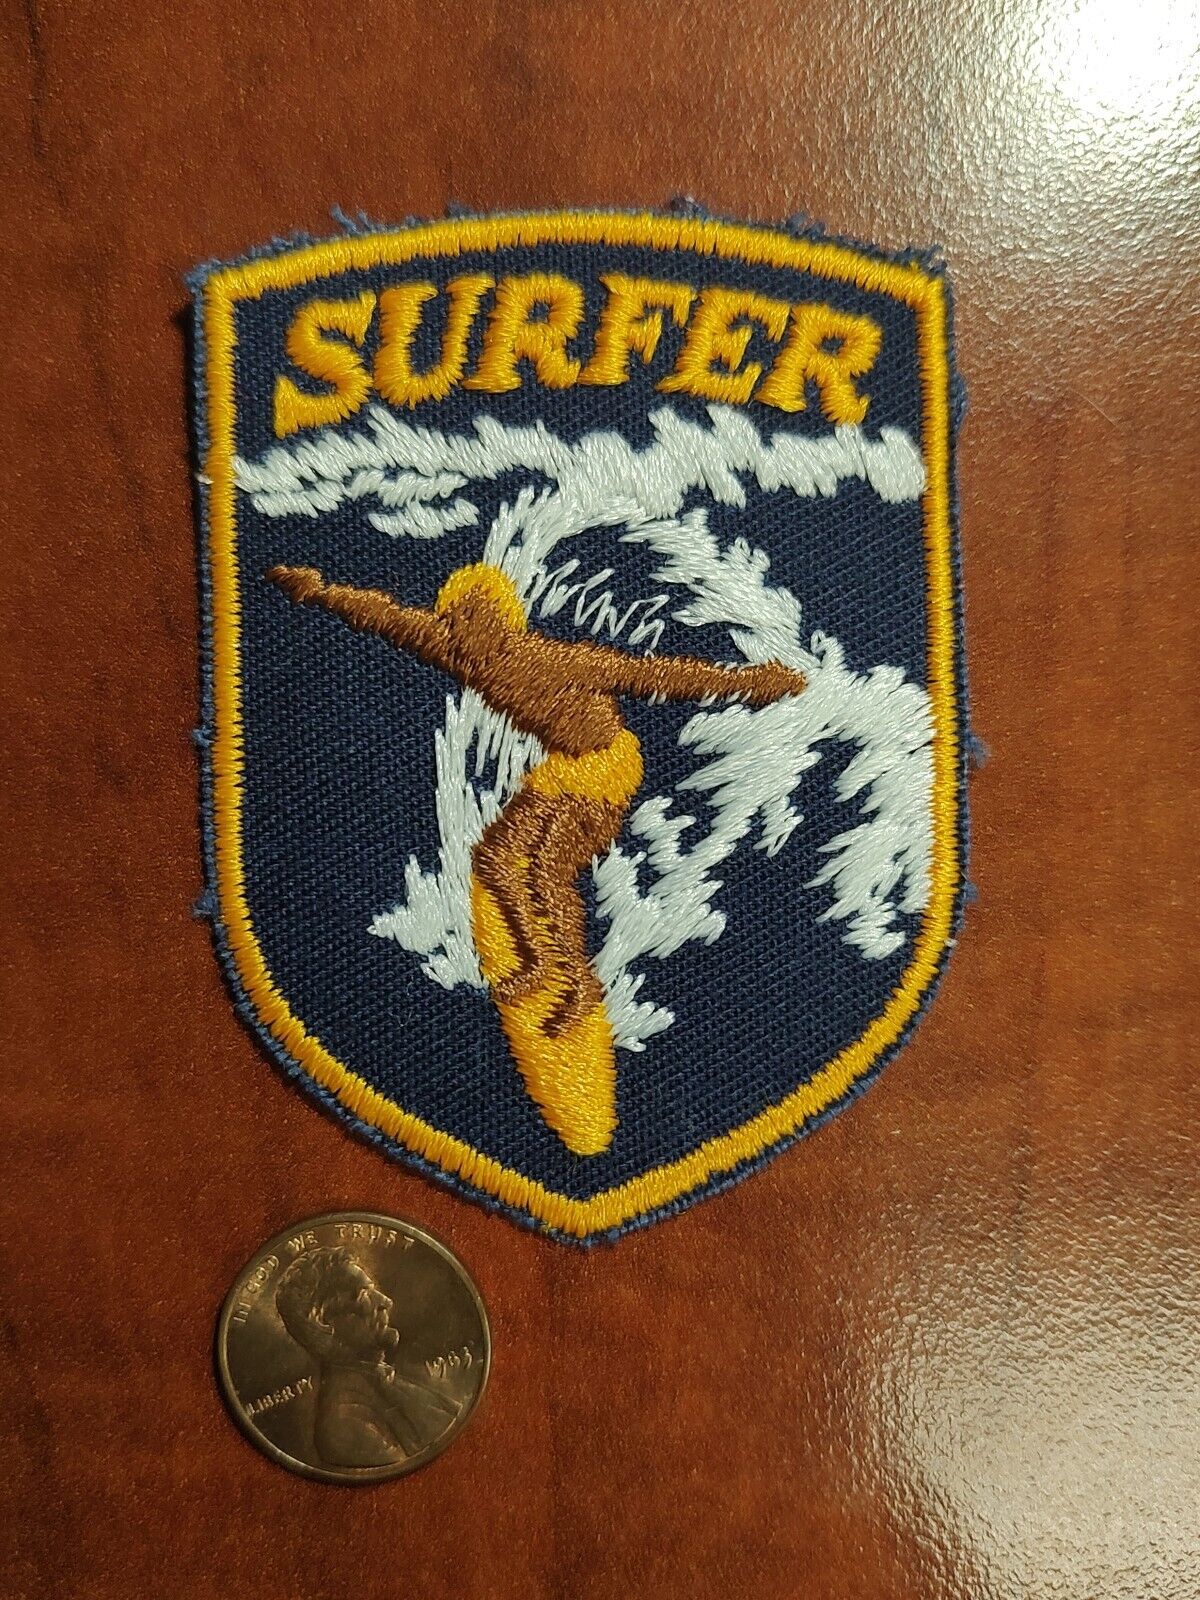 Vintage Voyager Surfer Patch Emblem Surfing Beach Retro Waves NEW Iron On or Sew